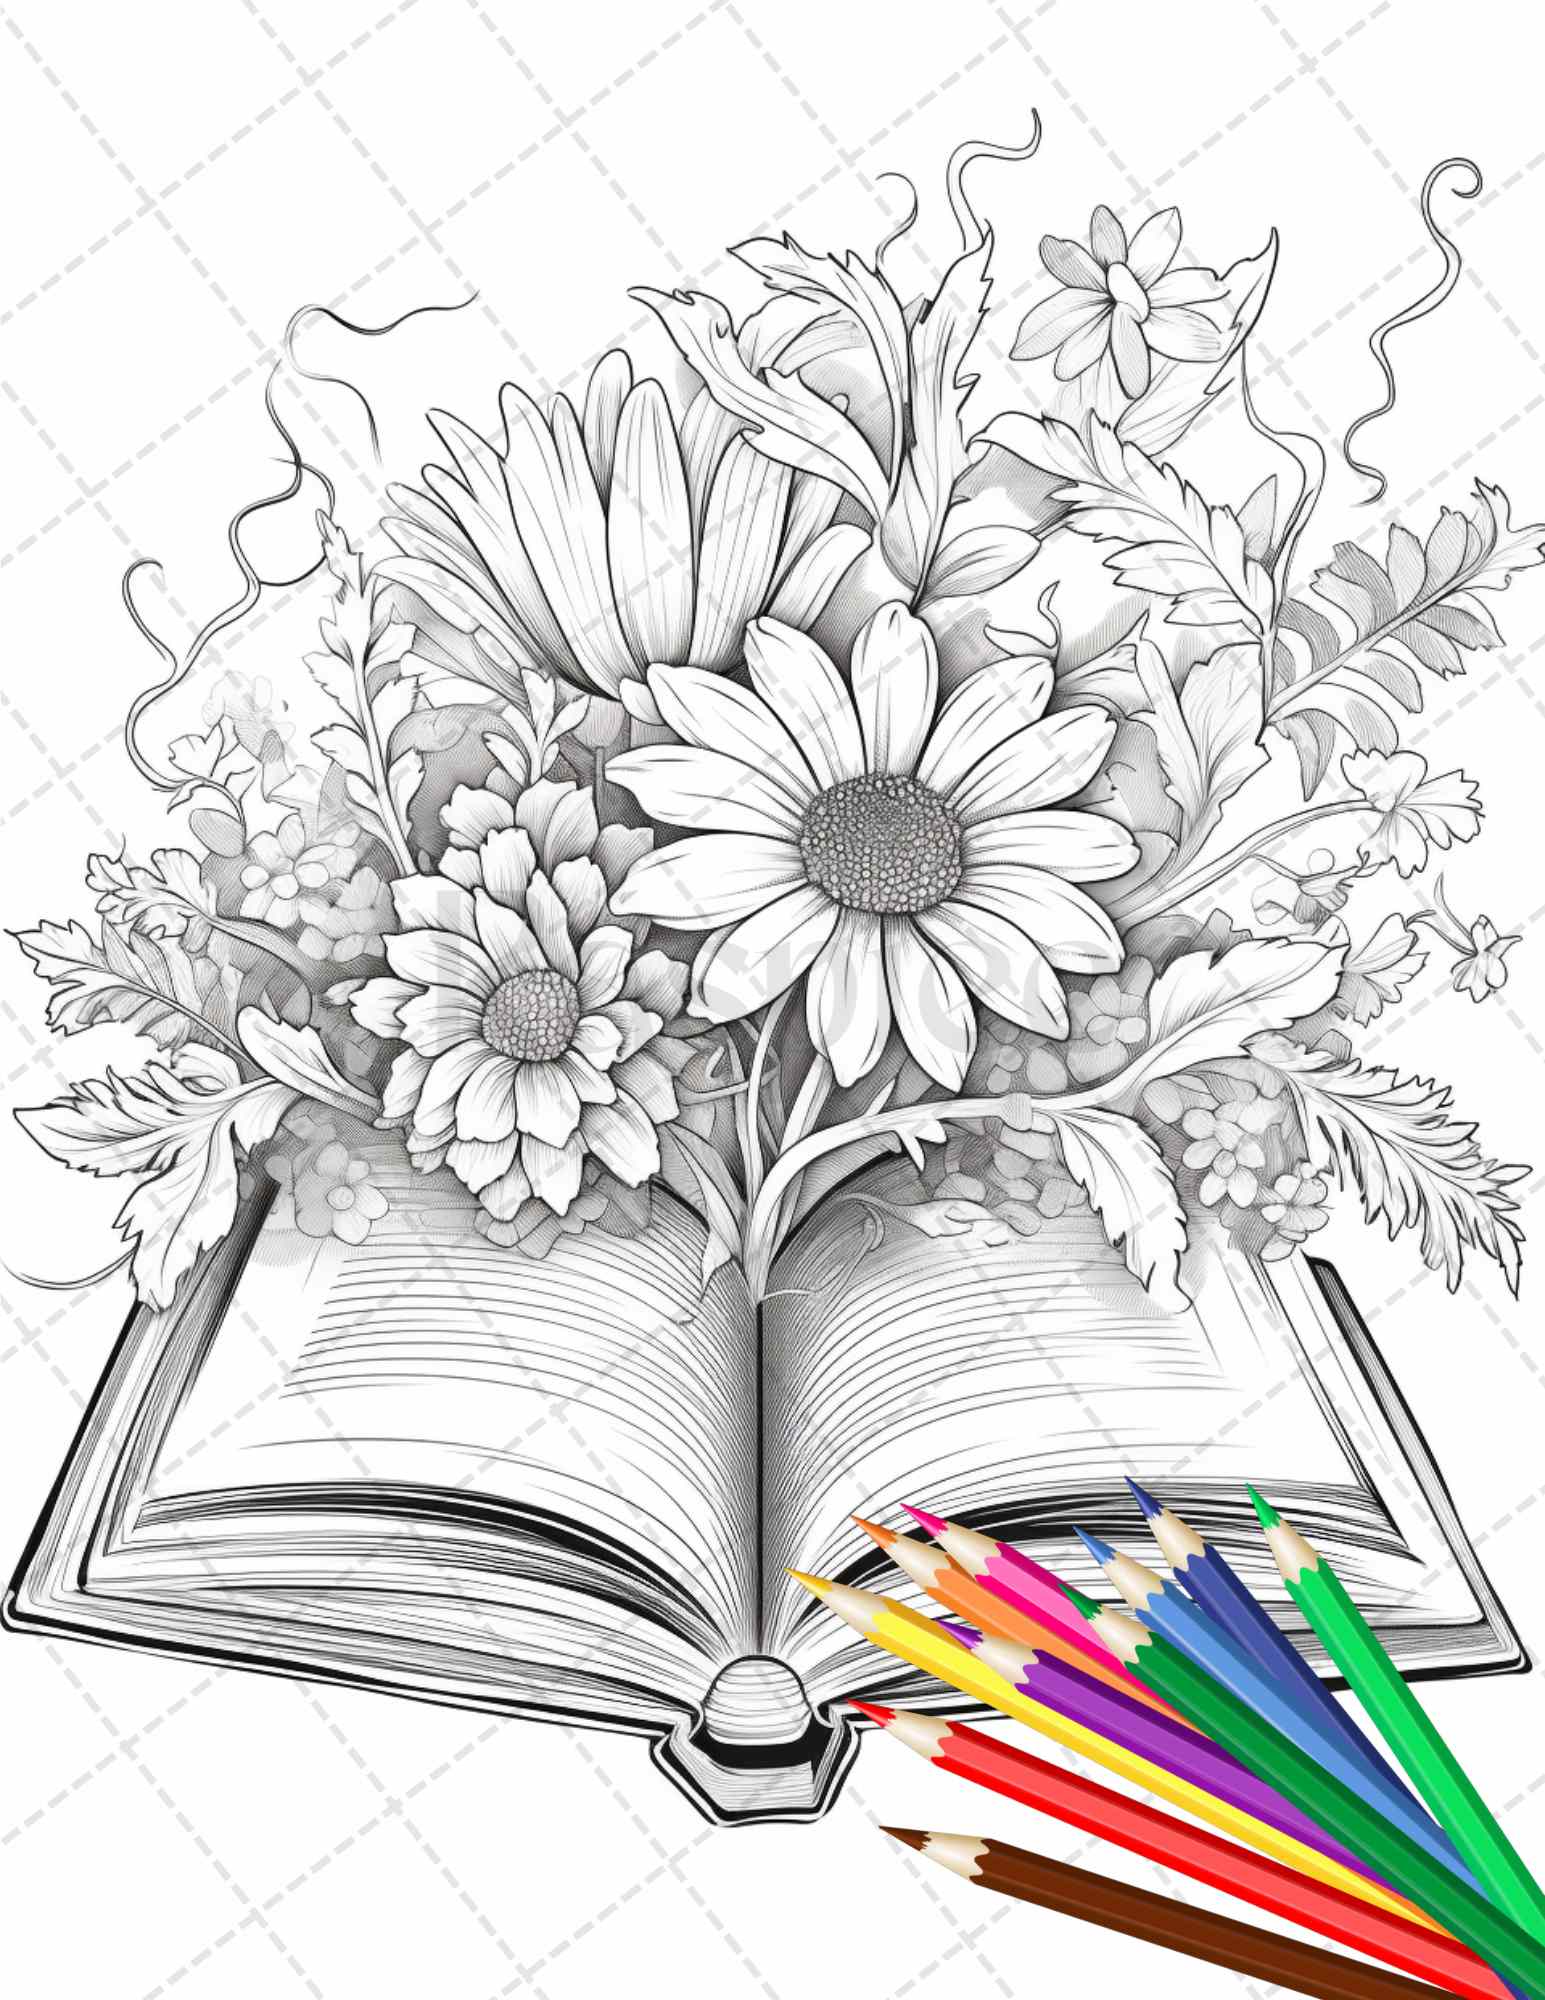 Book flowers coloring pages printable for adults grayscale colorin â coloring